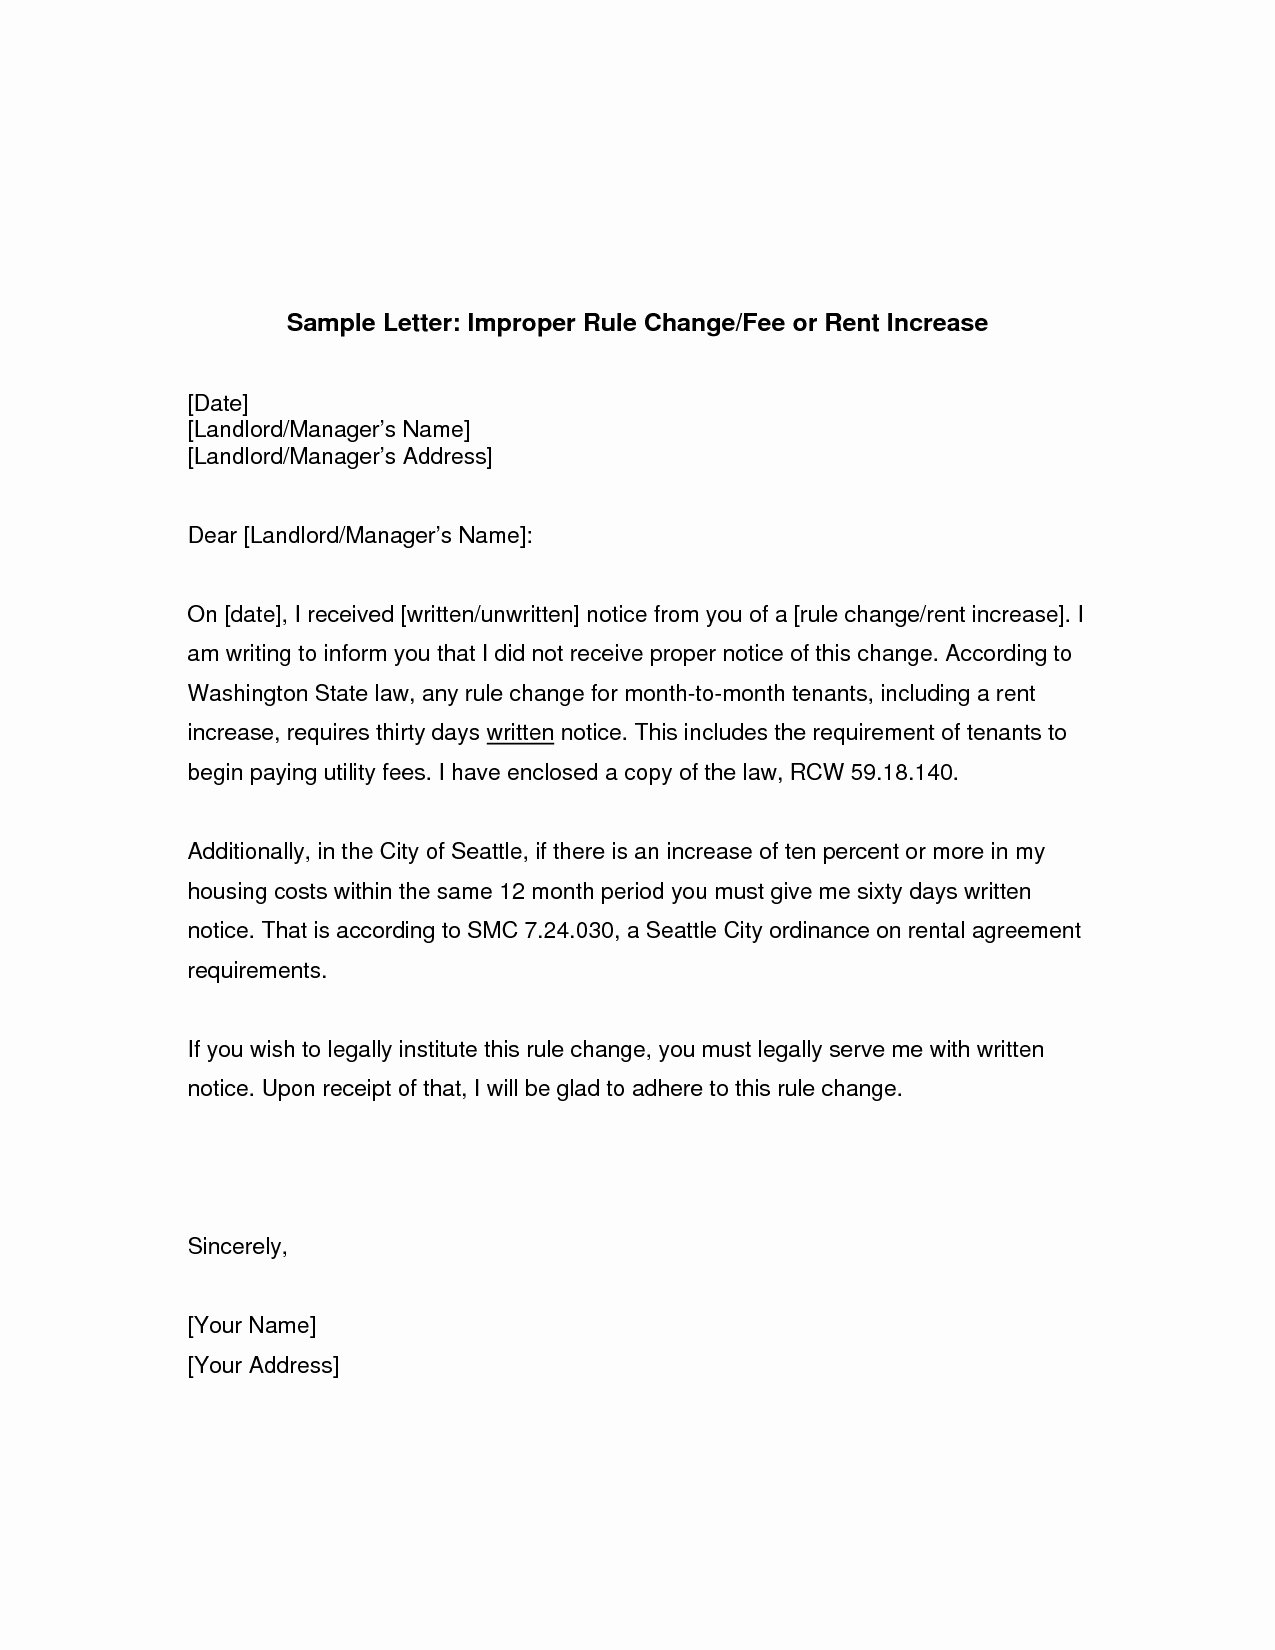 Transfer Of Ownership Template Elegant Change Ownership Letter to Tenants Template Examples